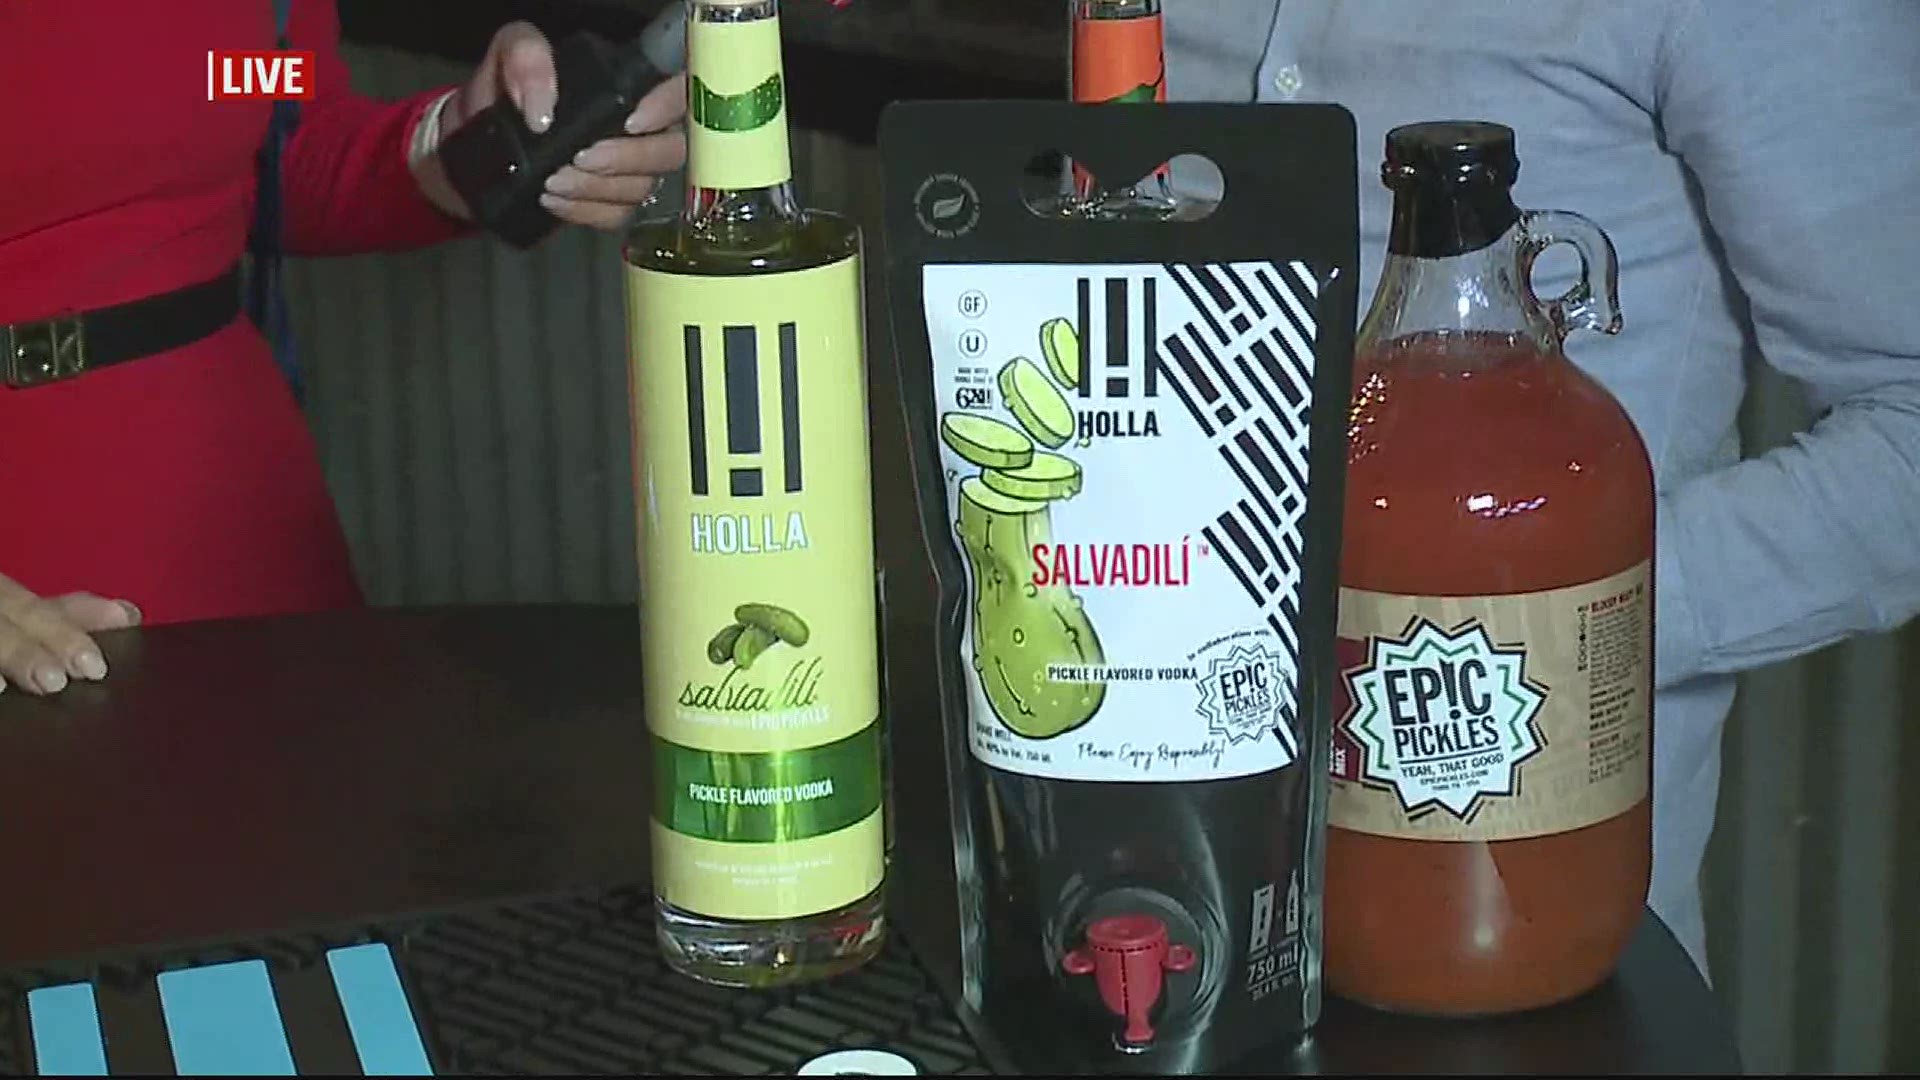 Collaboration between these two york businesses is pretty cool. So a spirits company and a pickle company have joined forces to create a pickle flavored vodka.